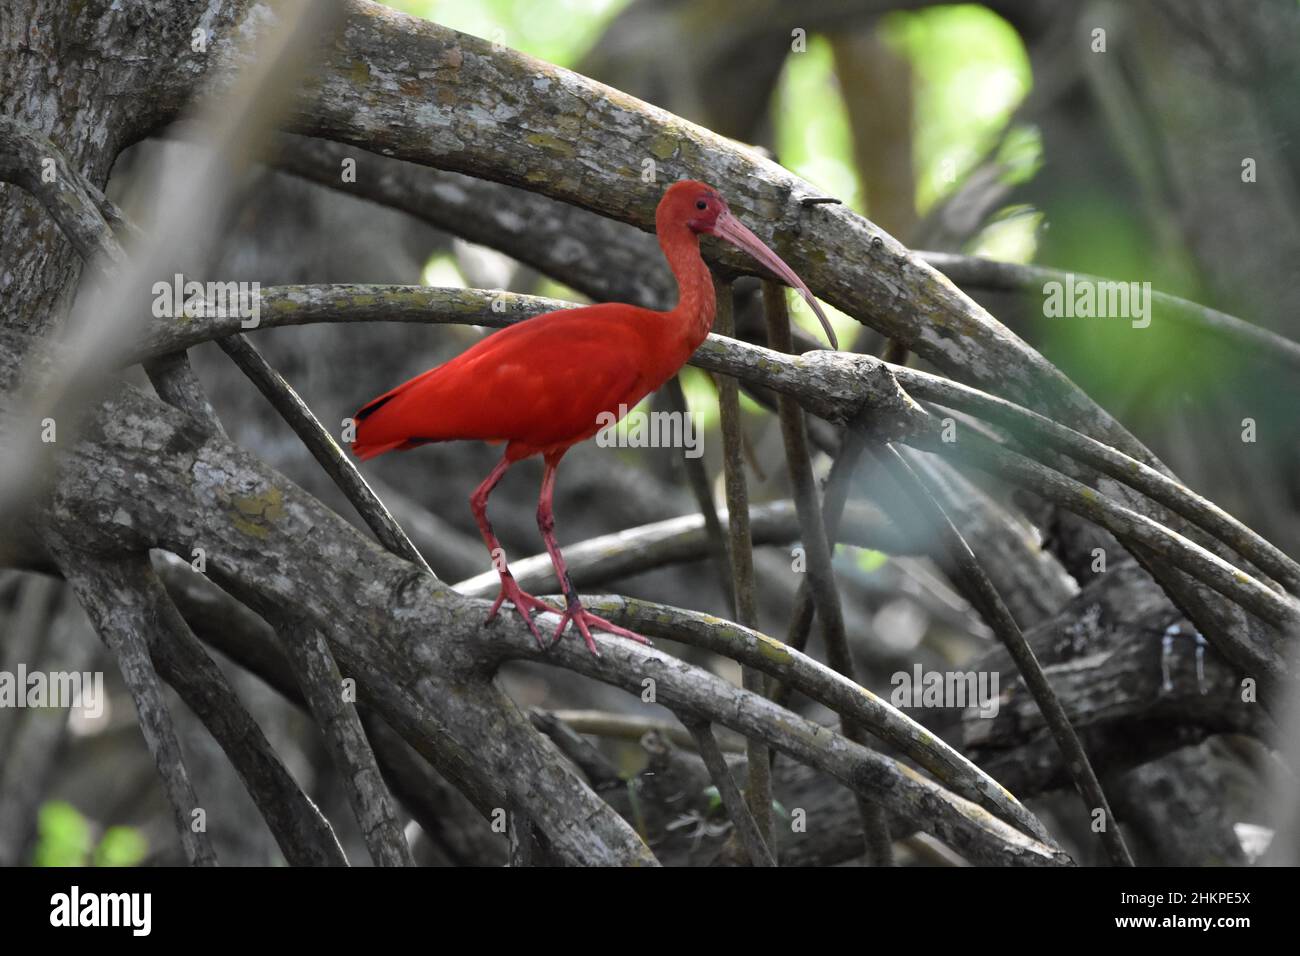 A Scarlet ibis on a mangrove branch in the Caroni Swamp at the Caroni Bird Sanctuary in Trinidad. The Scarlet ibis is the National Bird of Trinidad. Stock Photo